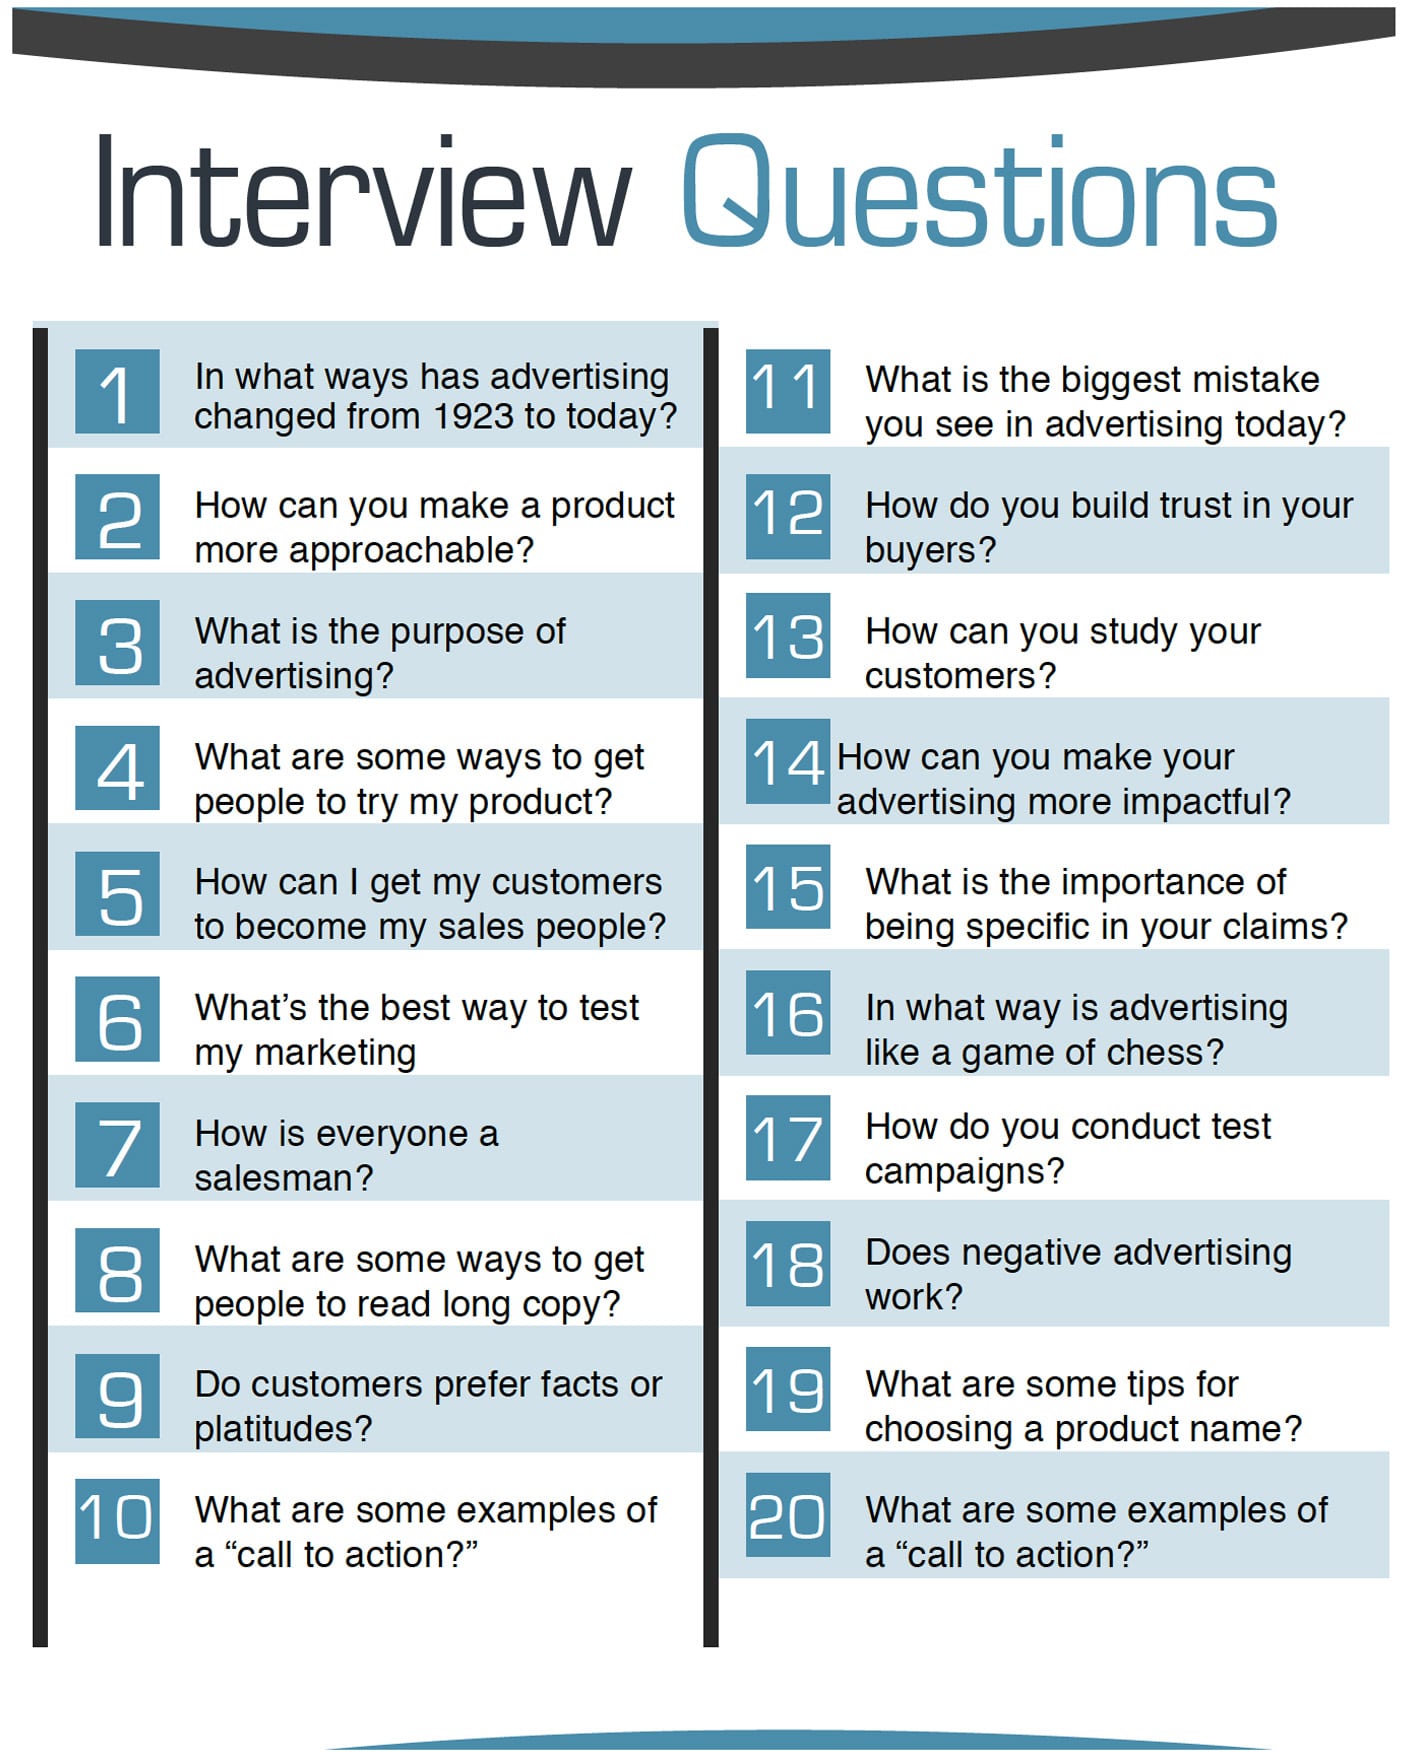 Interview Questions For Sales Enablement - InterviewProTips.com